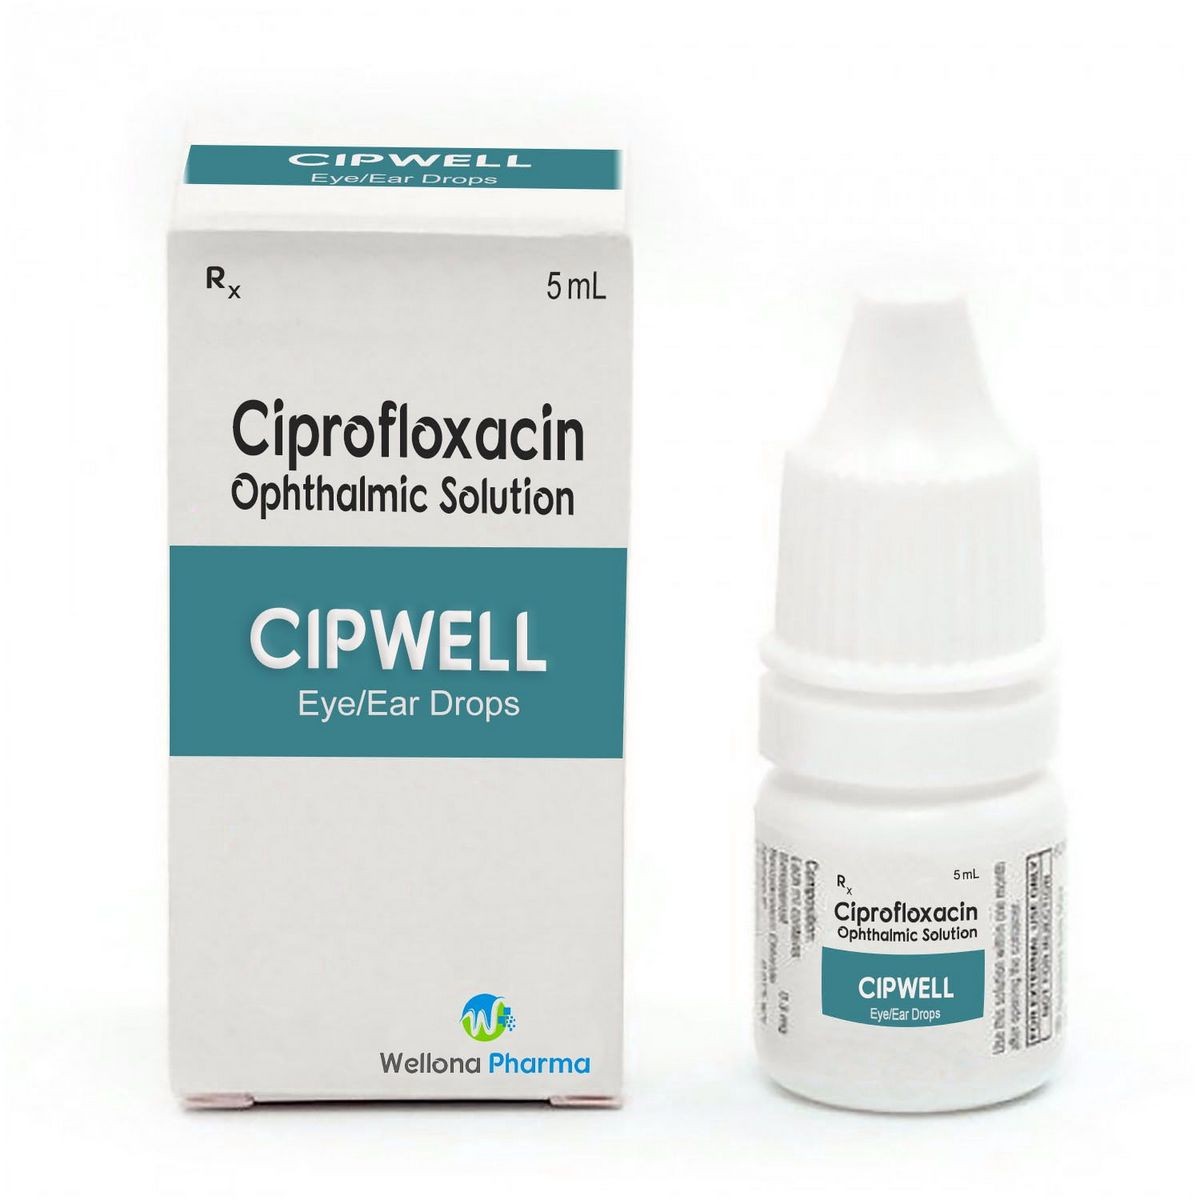 CIPROFLOXACIN OINTMENT - OPHTHALMIC Ciloxan side effects medical uses and drug interactions